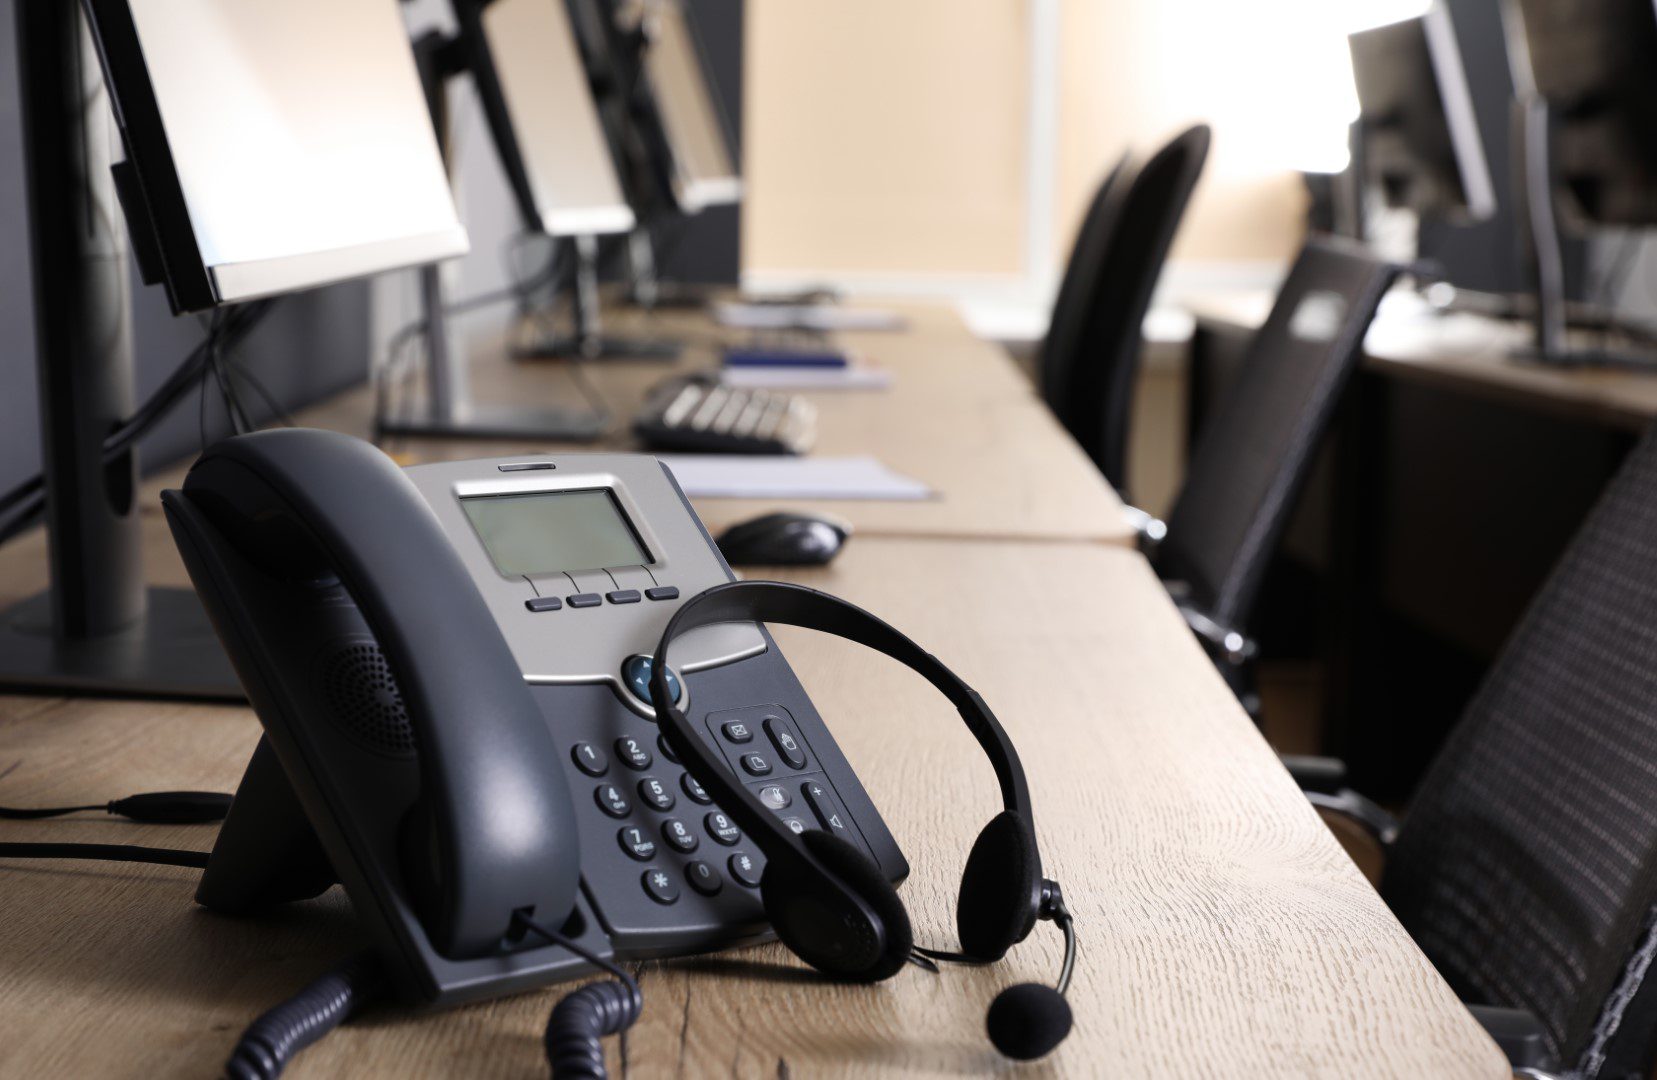 3CX PBX Systems for IT Companies